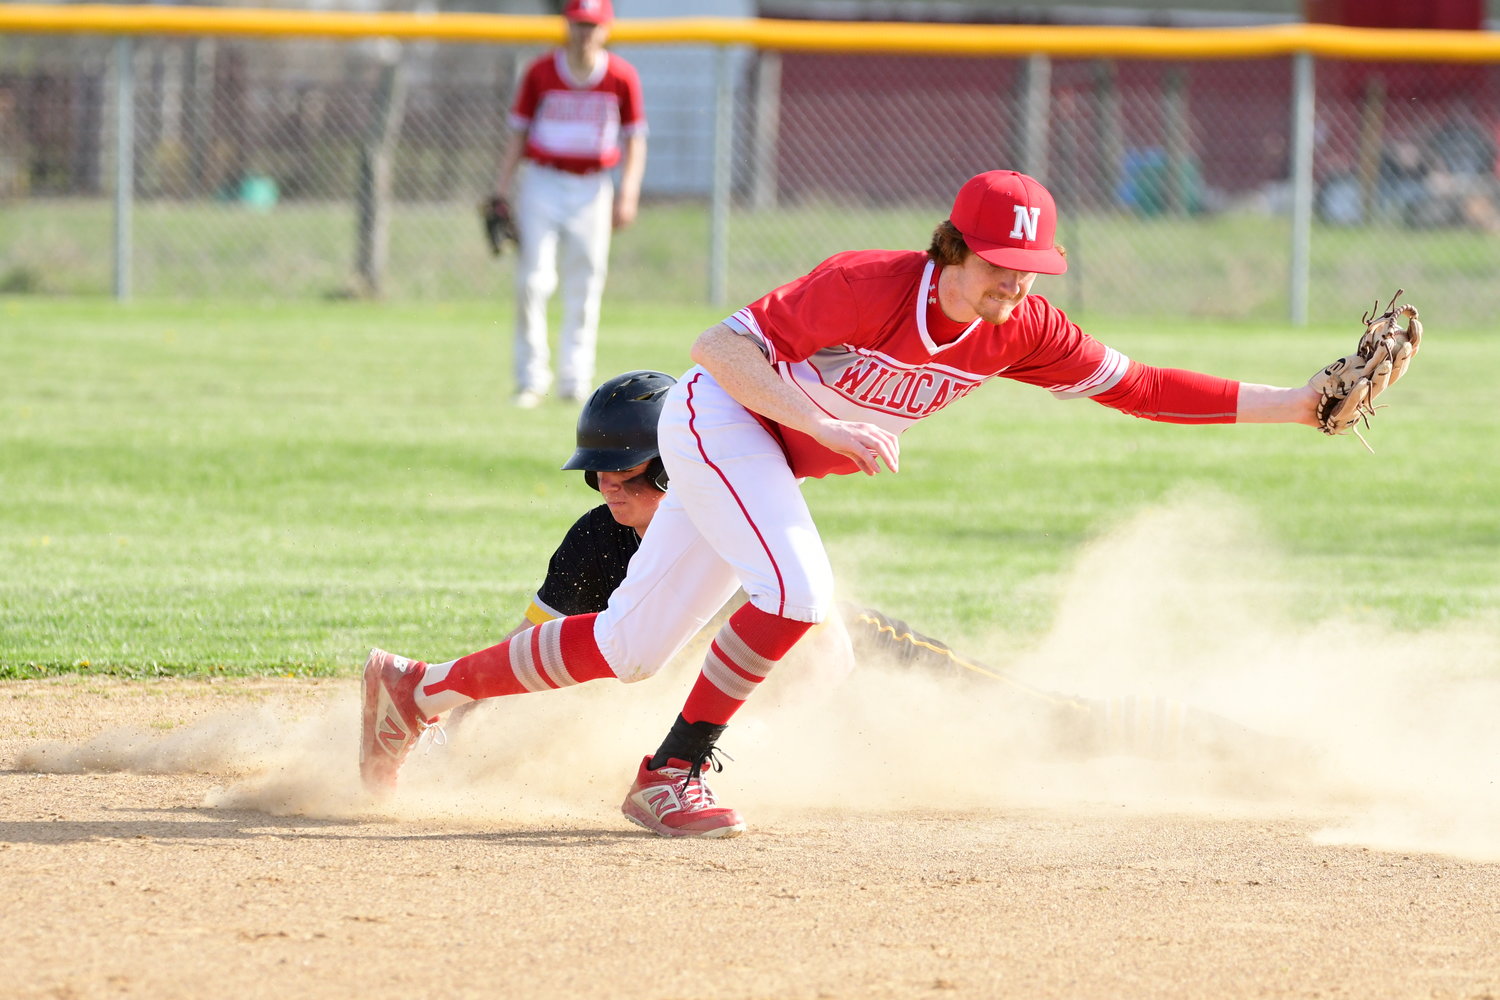 Action from a baseball game between Green City and Novinger from April 27, 2022.